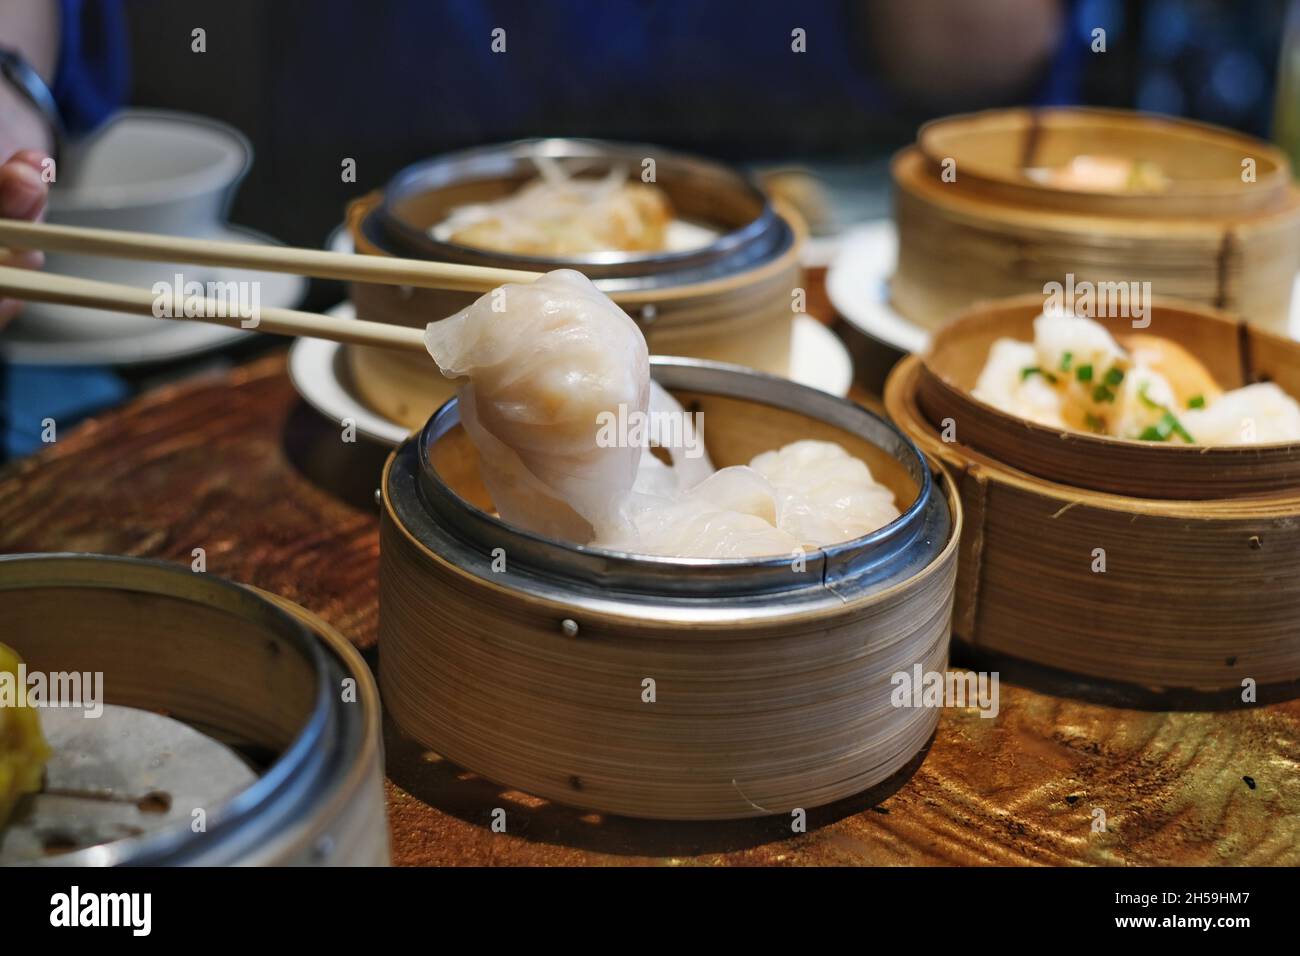 A close-up picture of bamboo chopsticks picking up white white Chinese stuffed steamed dumpling, also known as dim sum from a round bamboo basket on a Stock Photo